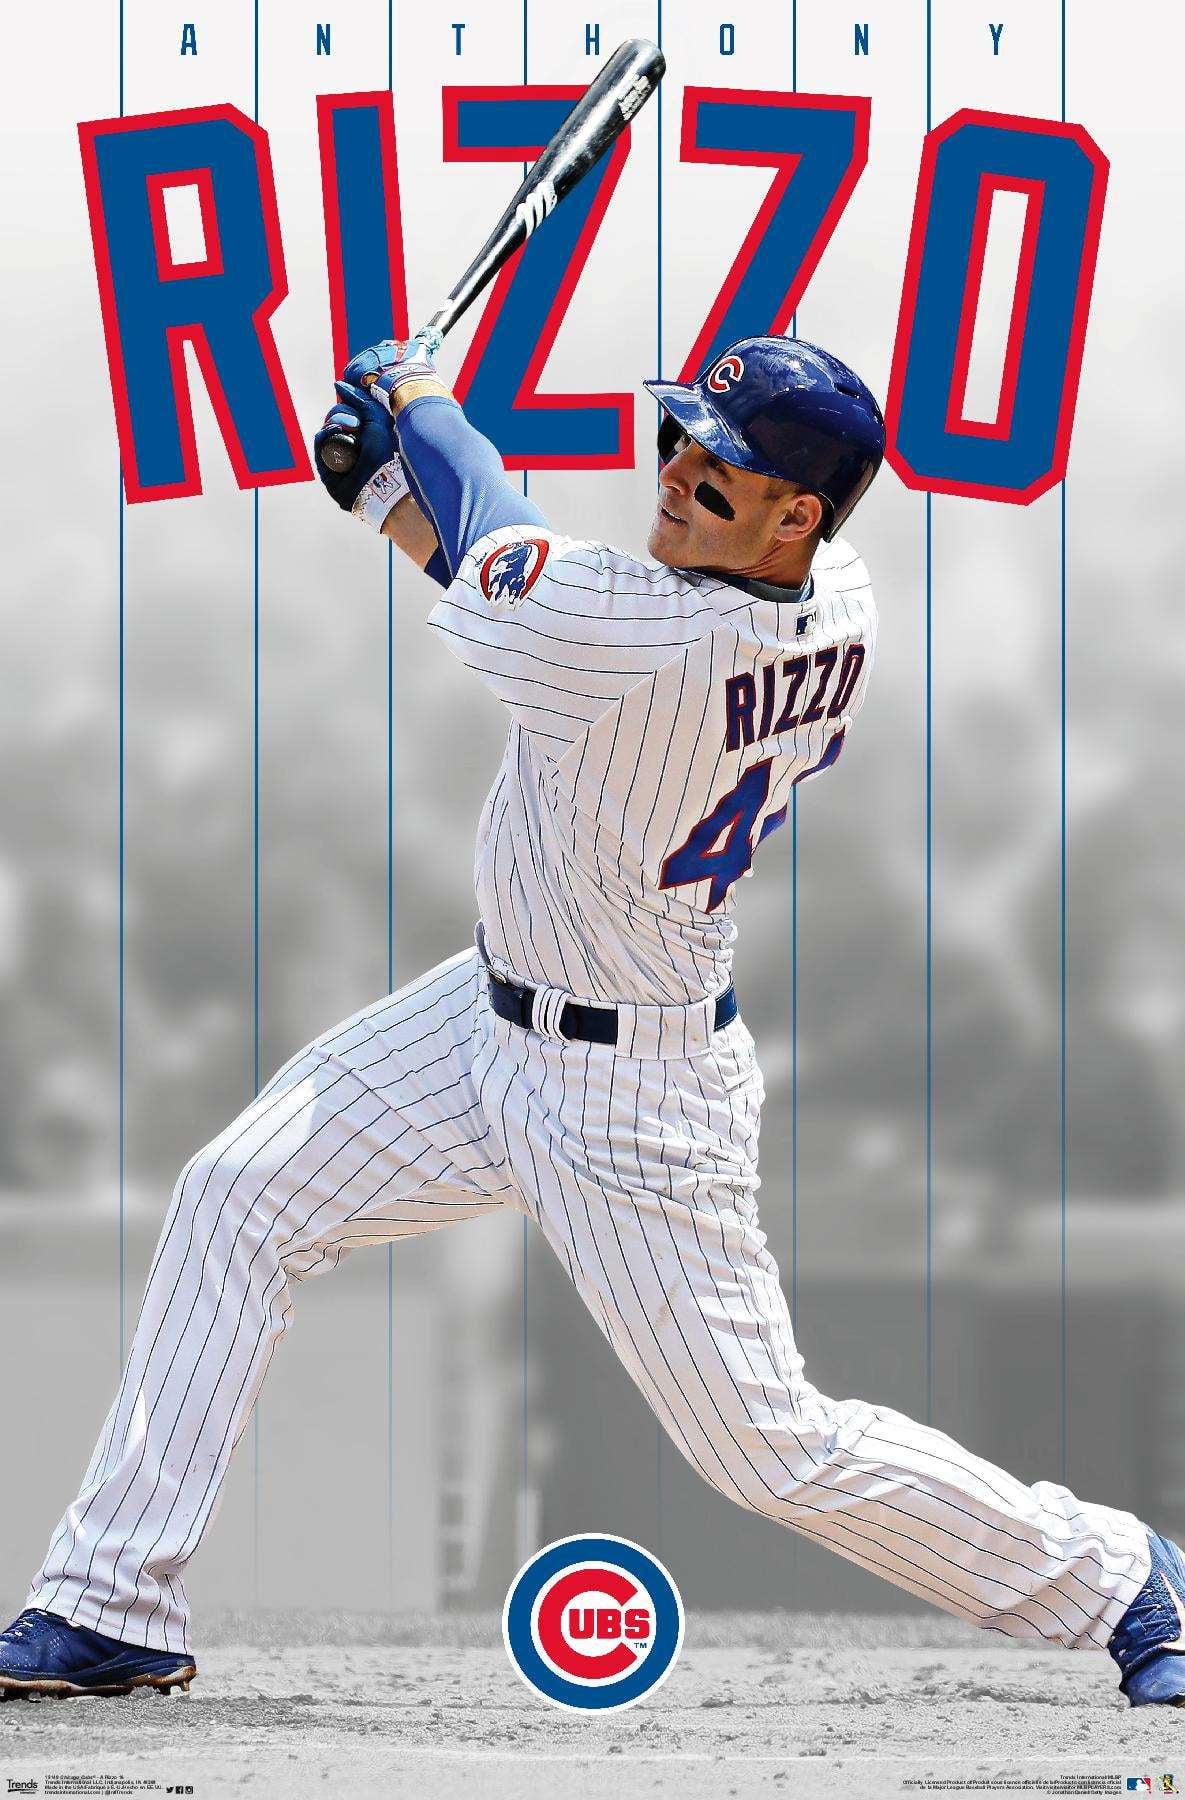 Official Anthony Rizzo Jersey, Anthony Rizzo Yankees Shirts, Baseball  Apparel, Anthony Rizzo Gear